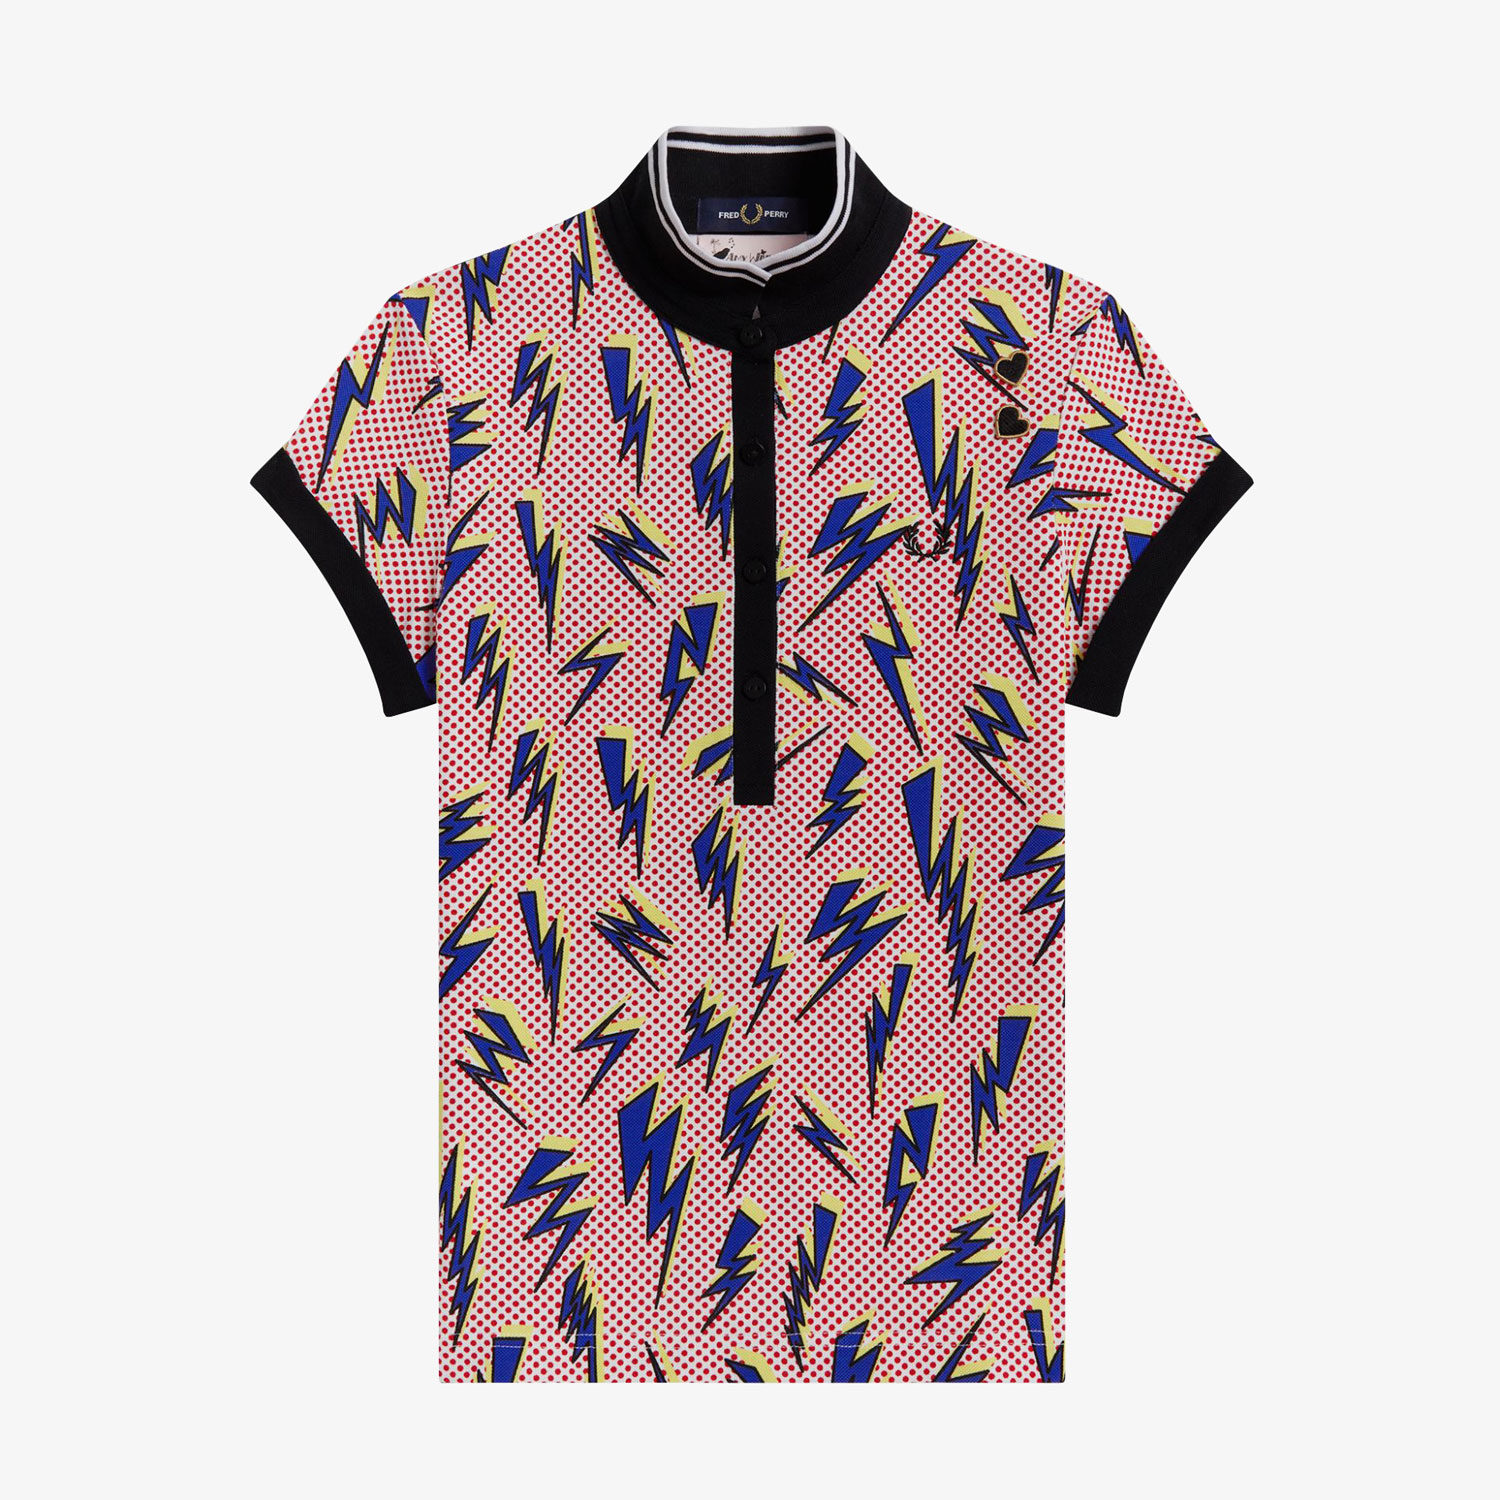 Fred Perry Women X Amy Winehouse Lightning Print Pique Polo - White